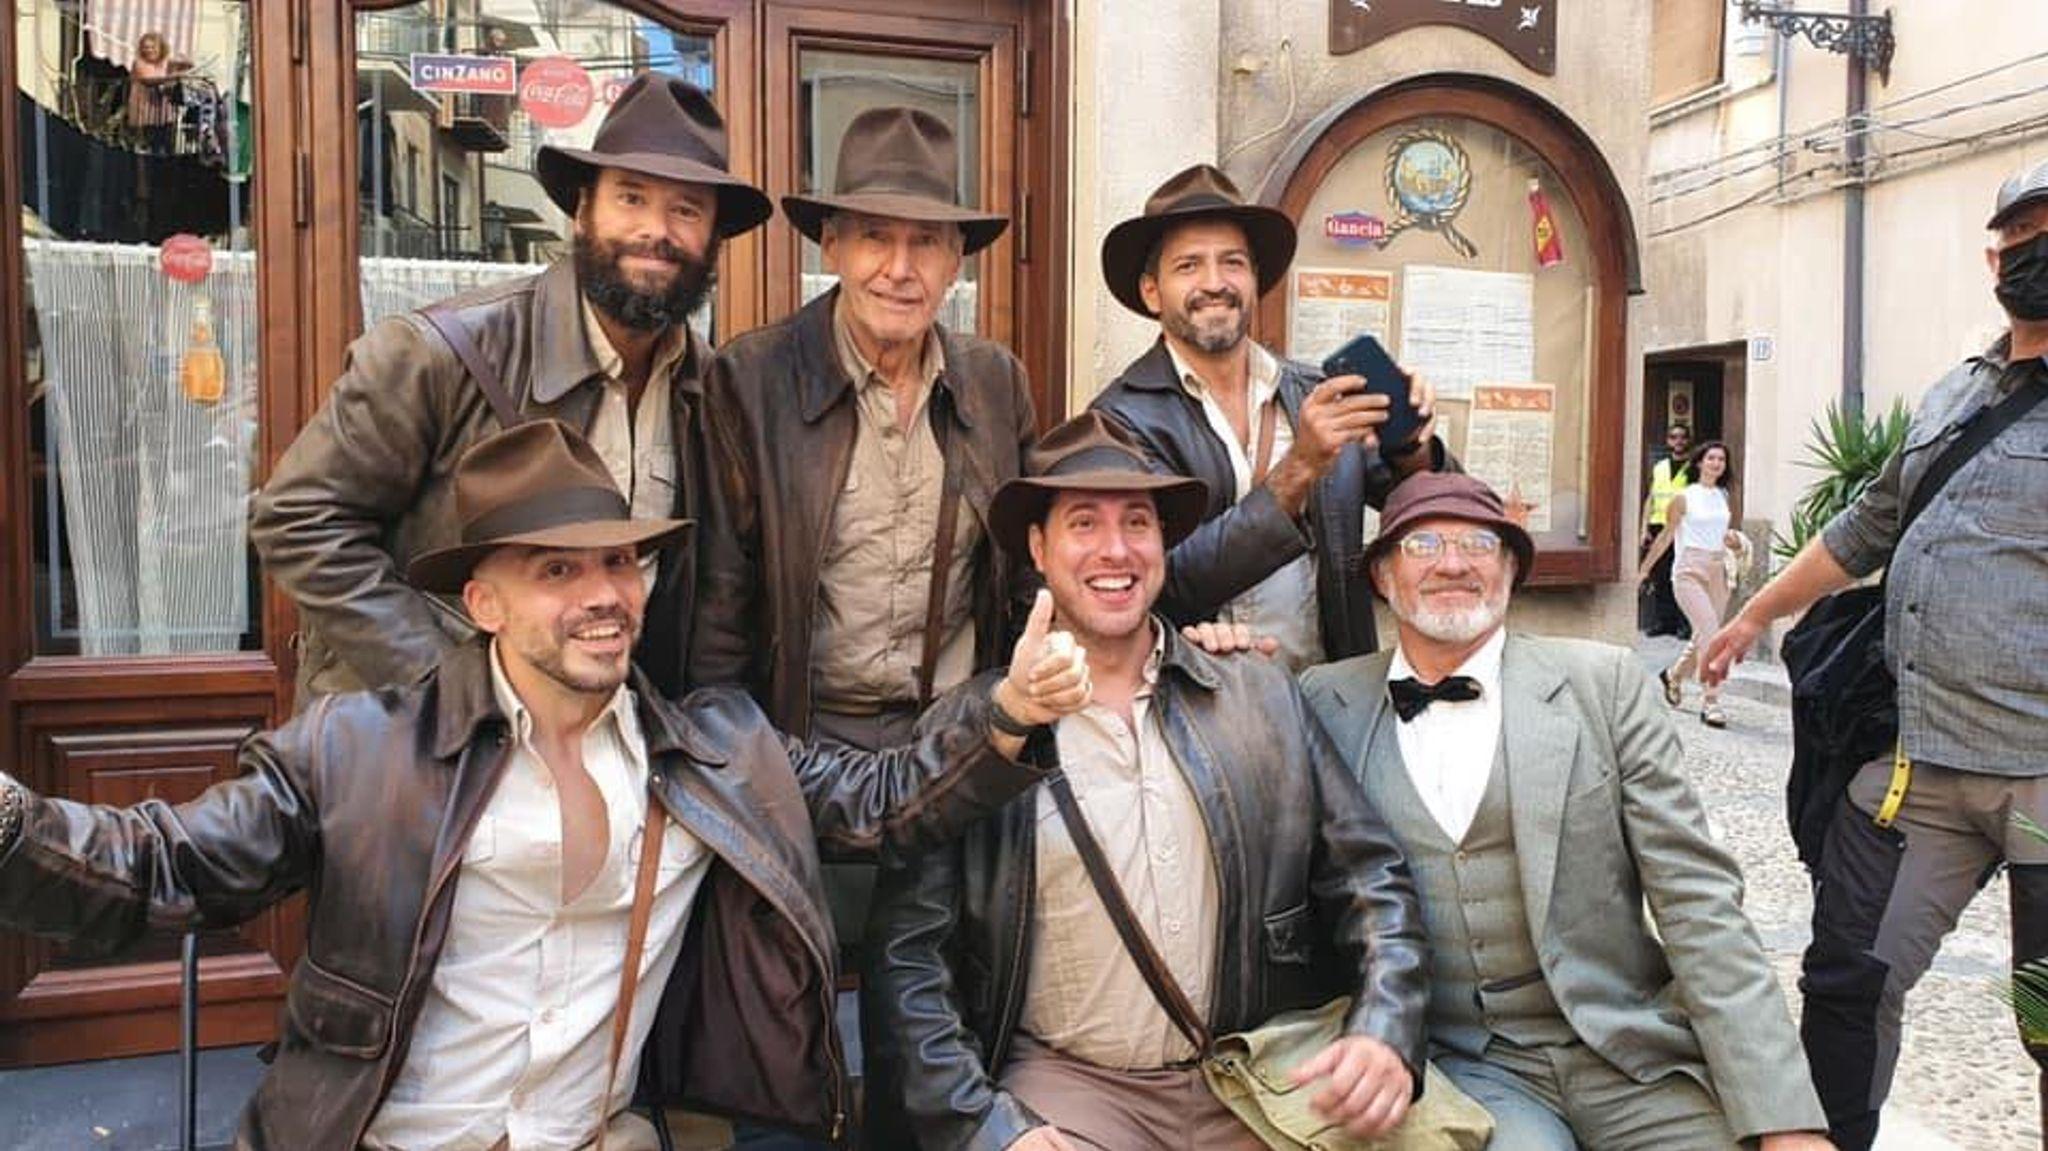 Harrison Ford Poses As Indiana Jones With Lookalike Fans Dressed